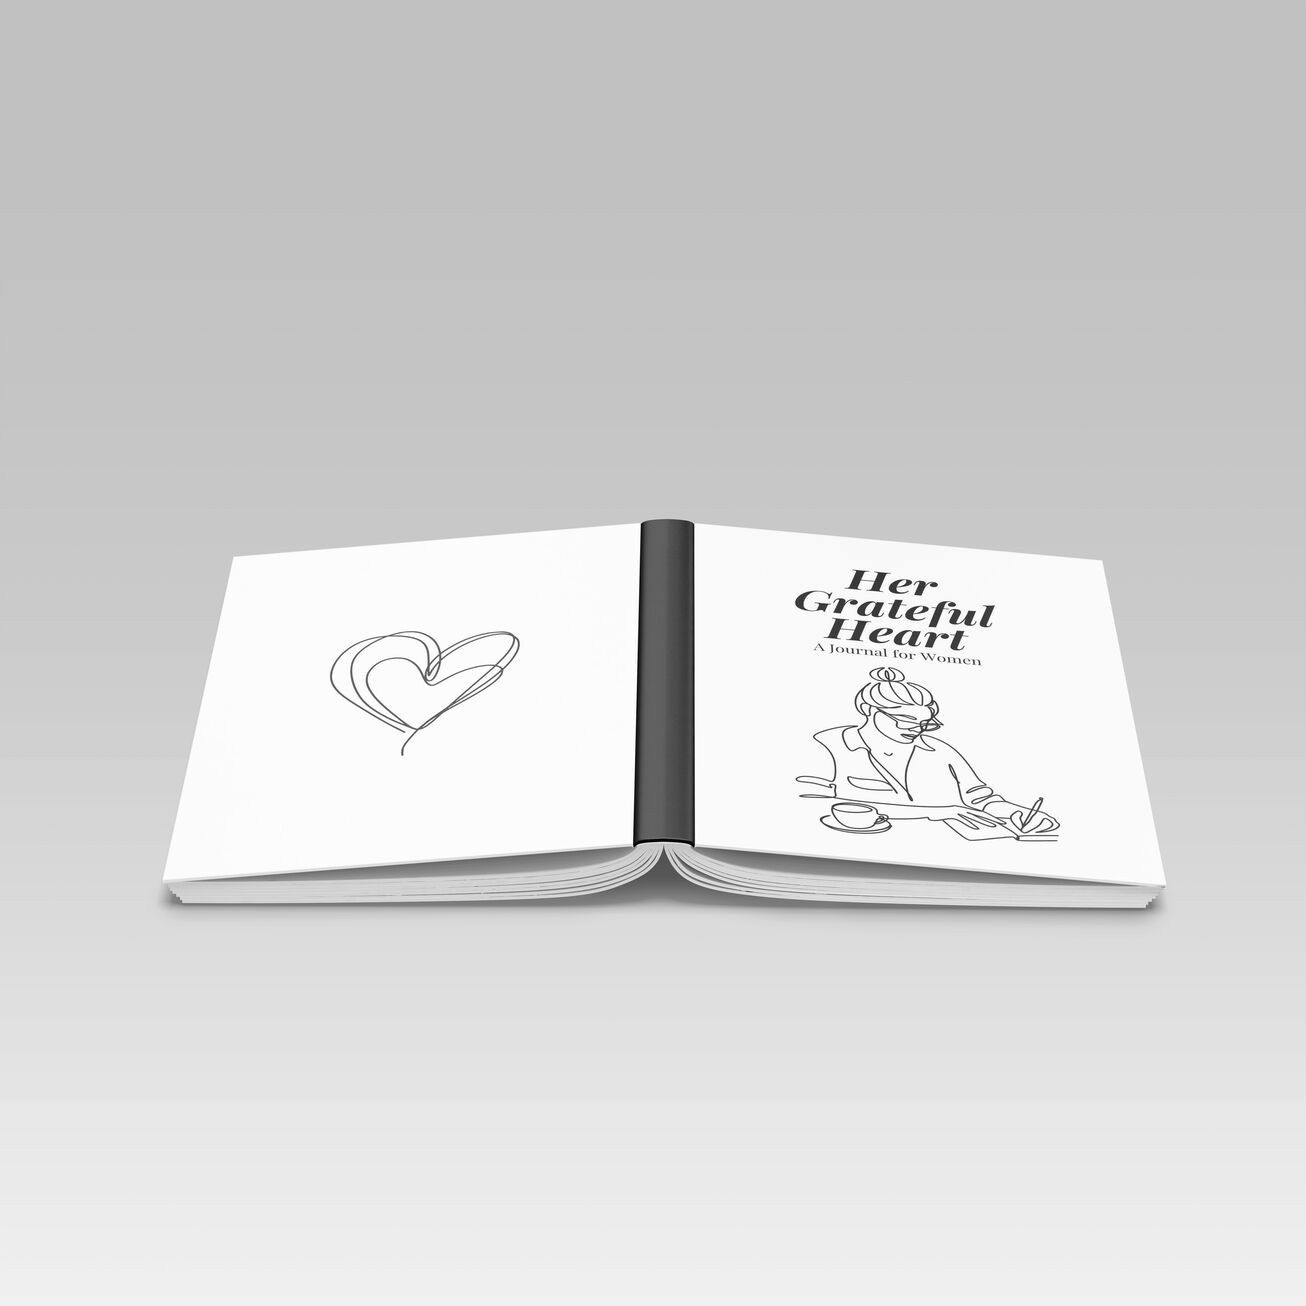 her grateful heart journal for women preview image.